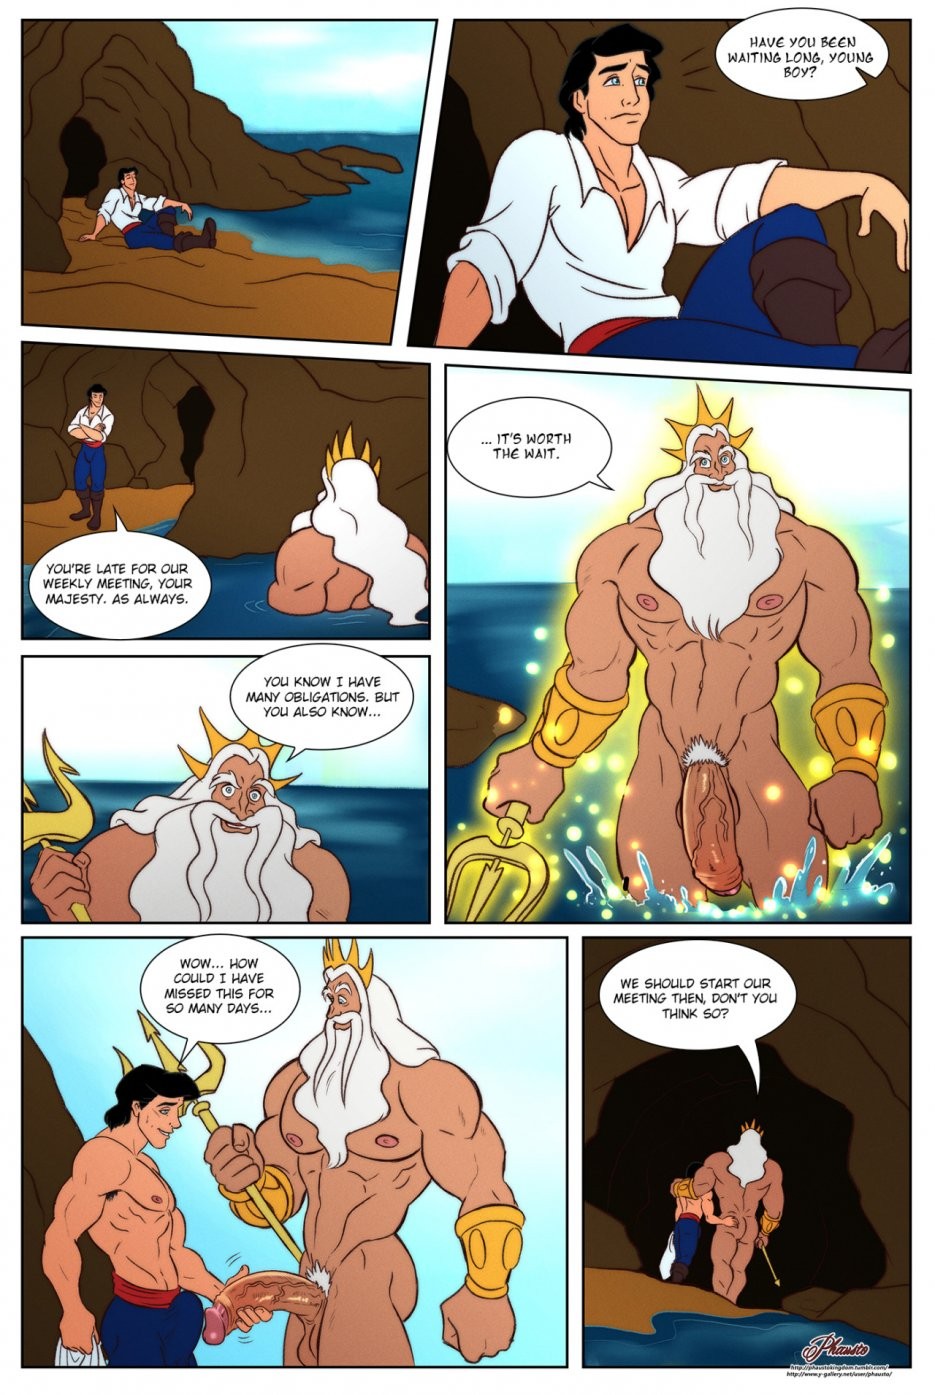 Royal Meeting porn comic picture 2